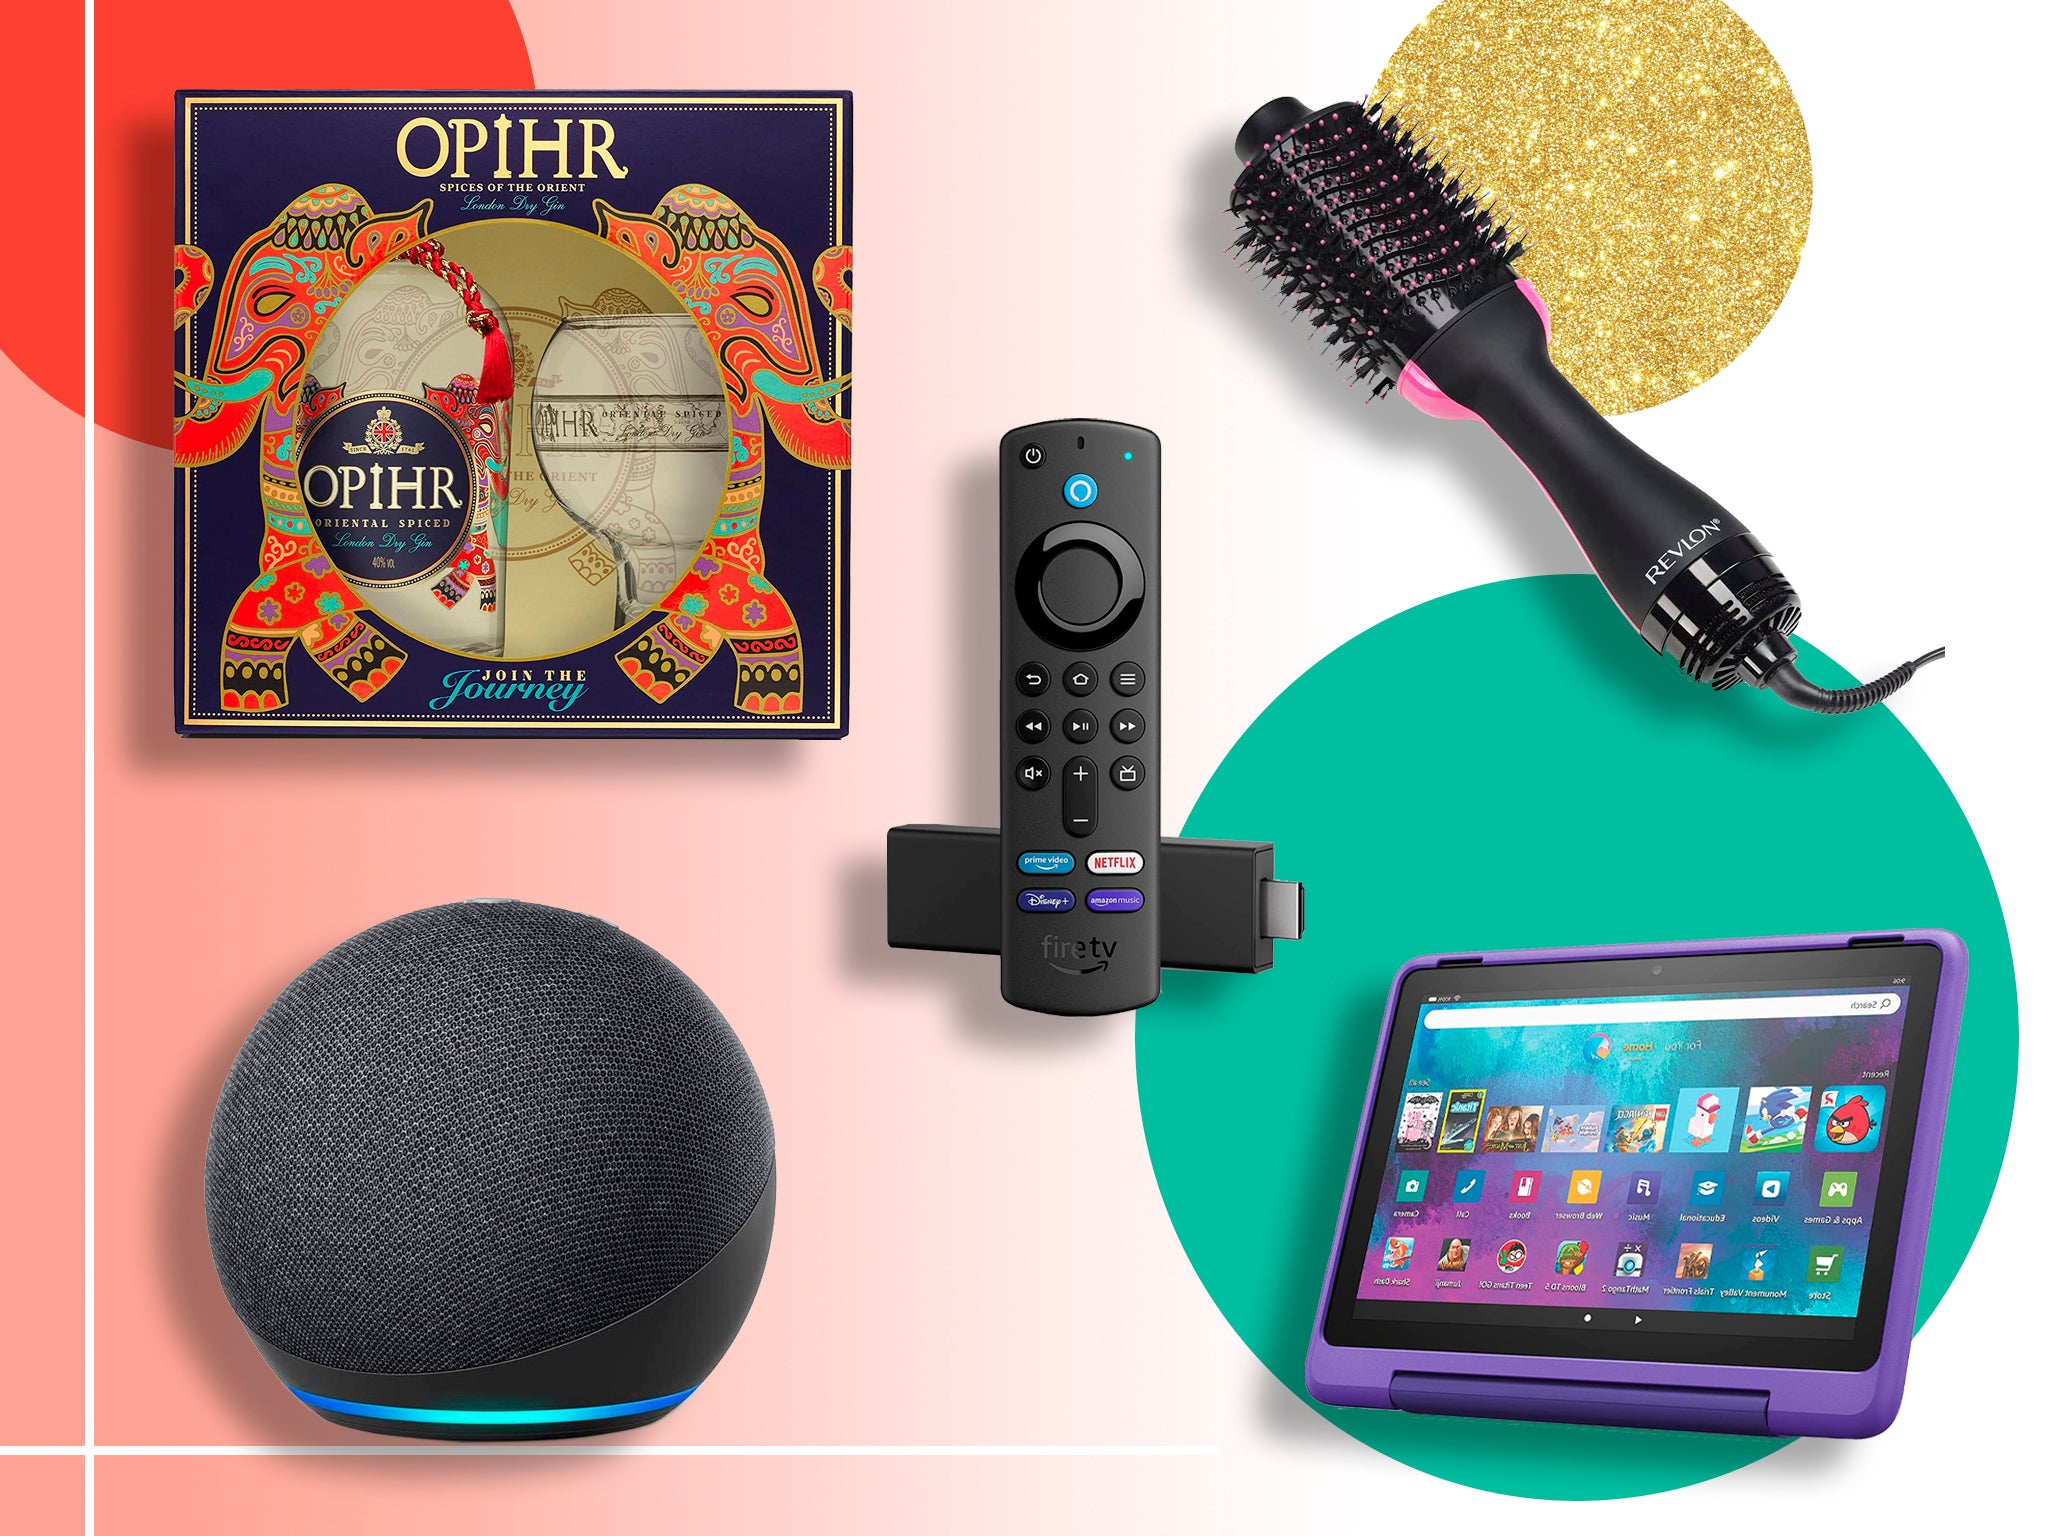 The week-long event sees up to 50% off beauty, tech, kids’ toys, alcohol and more